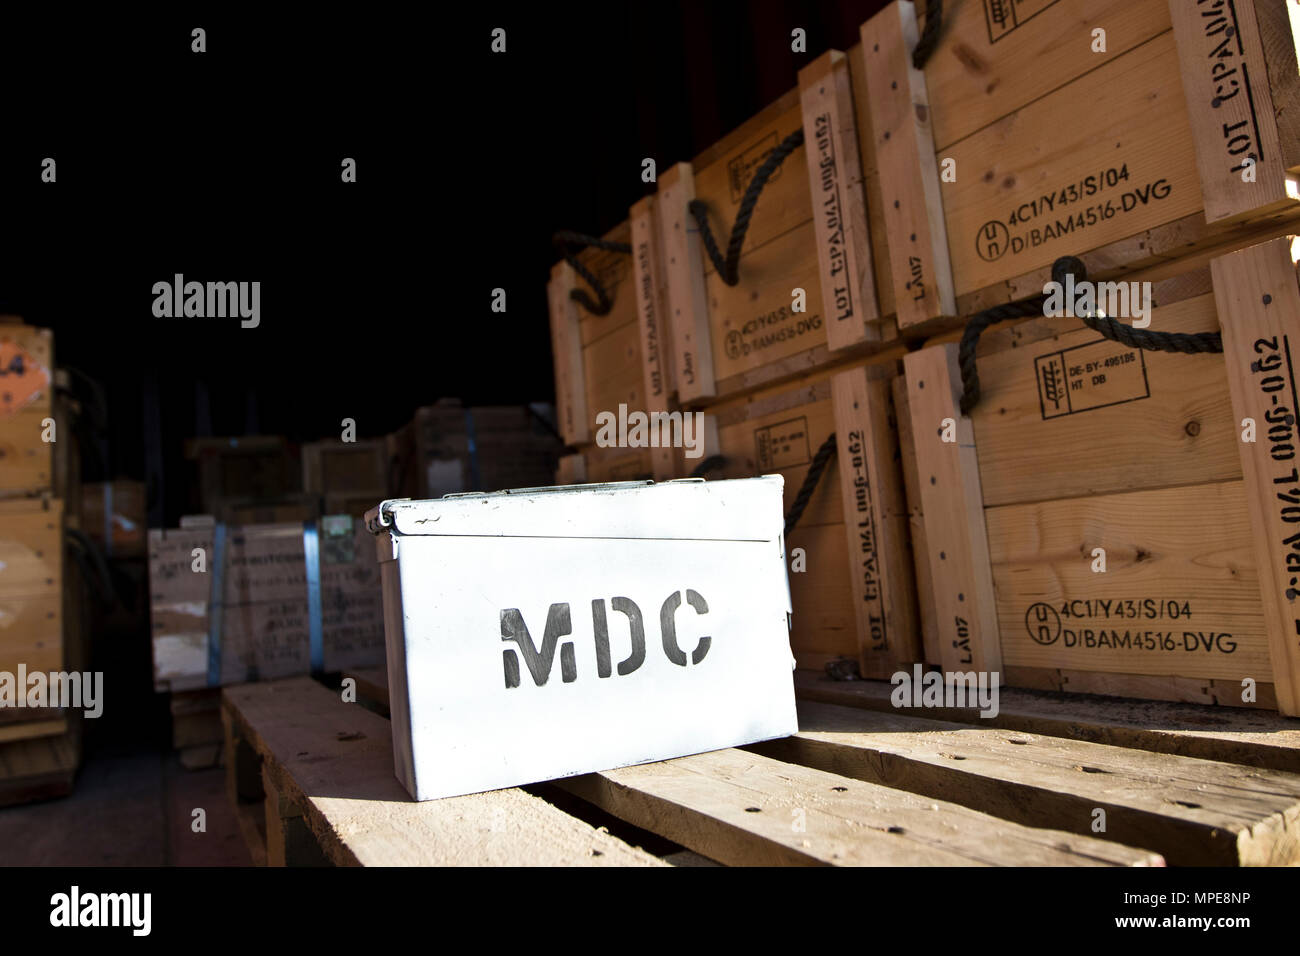 A Magazine Data Card (MDC) sits on an ammunition storage pallet during the 2017 Worldwide Ammunition Logistics and Explosives Safety Review in Camp Arifjan, Kuwait, on Feb. 7, 2017. The MDCs are a living document that counts the in and out of stock per ammo pallet. (U.S. Army Photo by Staff Sgt. Dalton Smith) Stock Photo